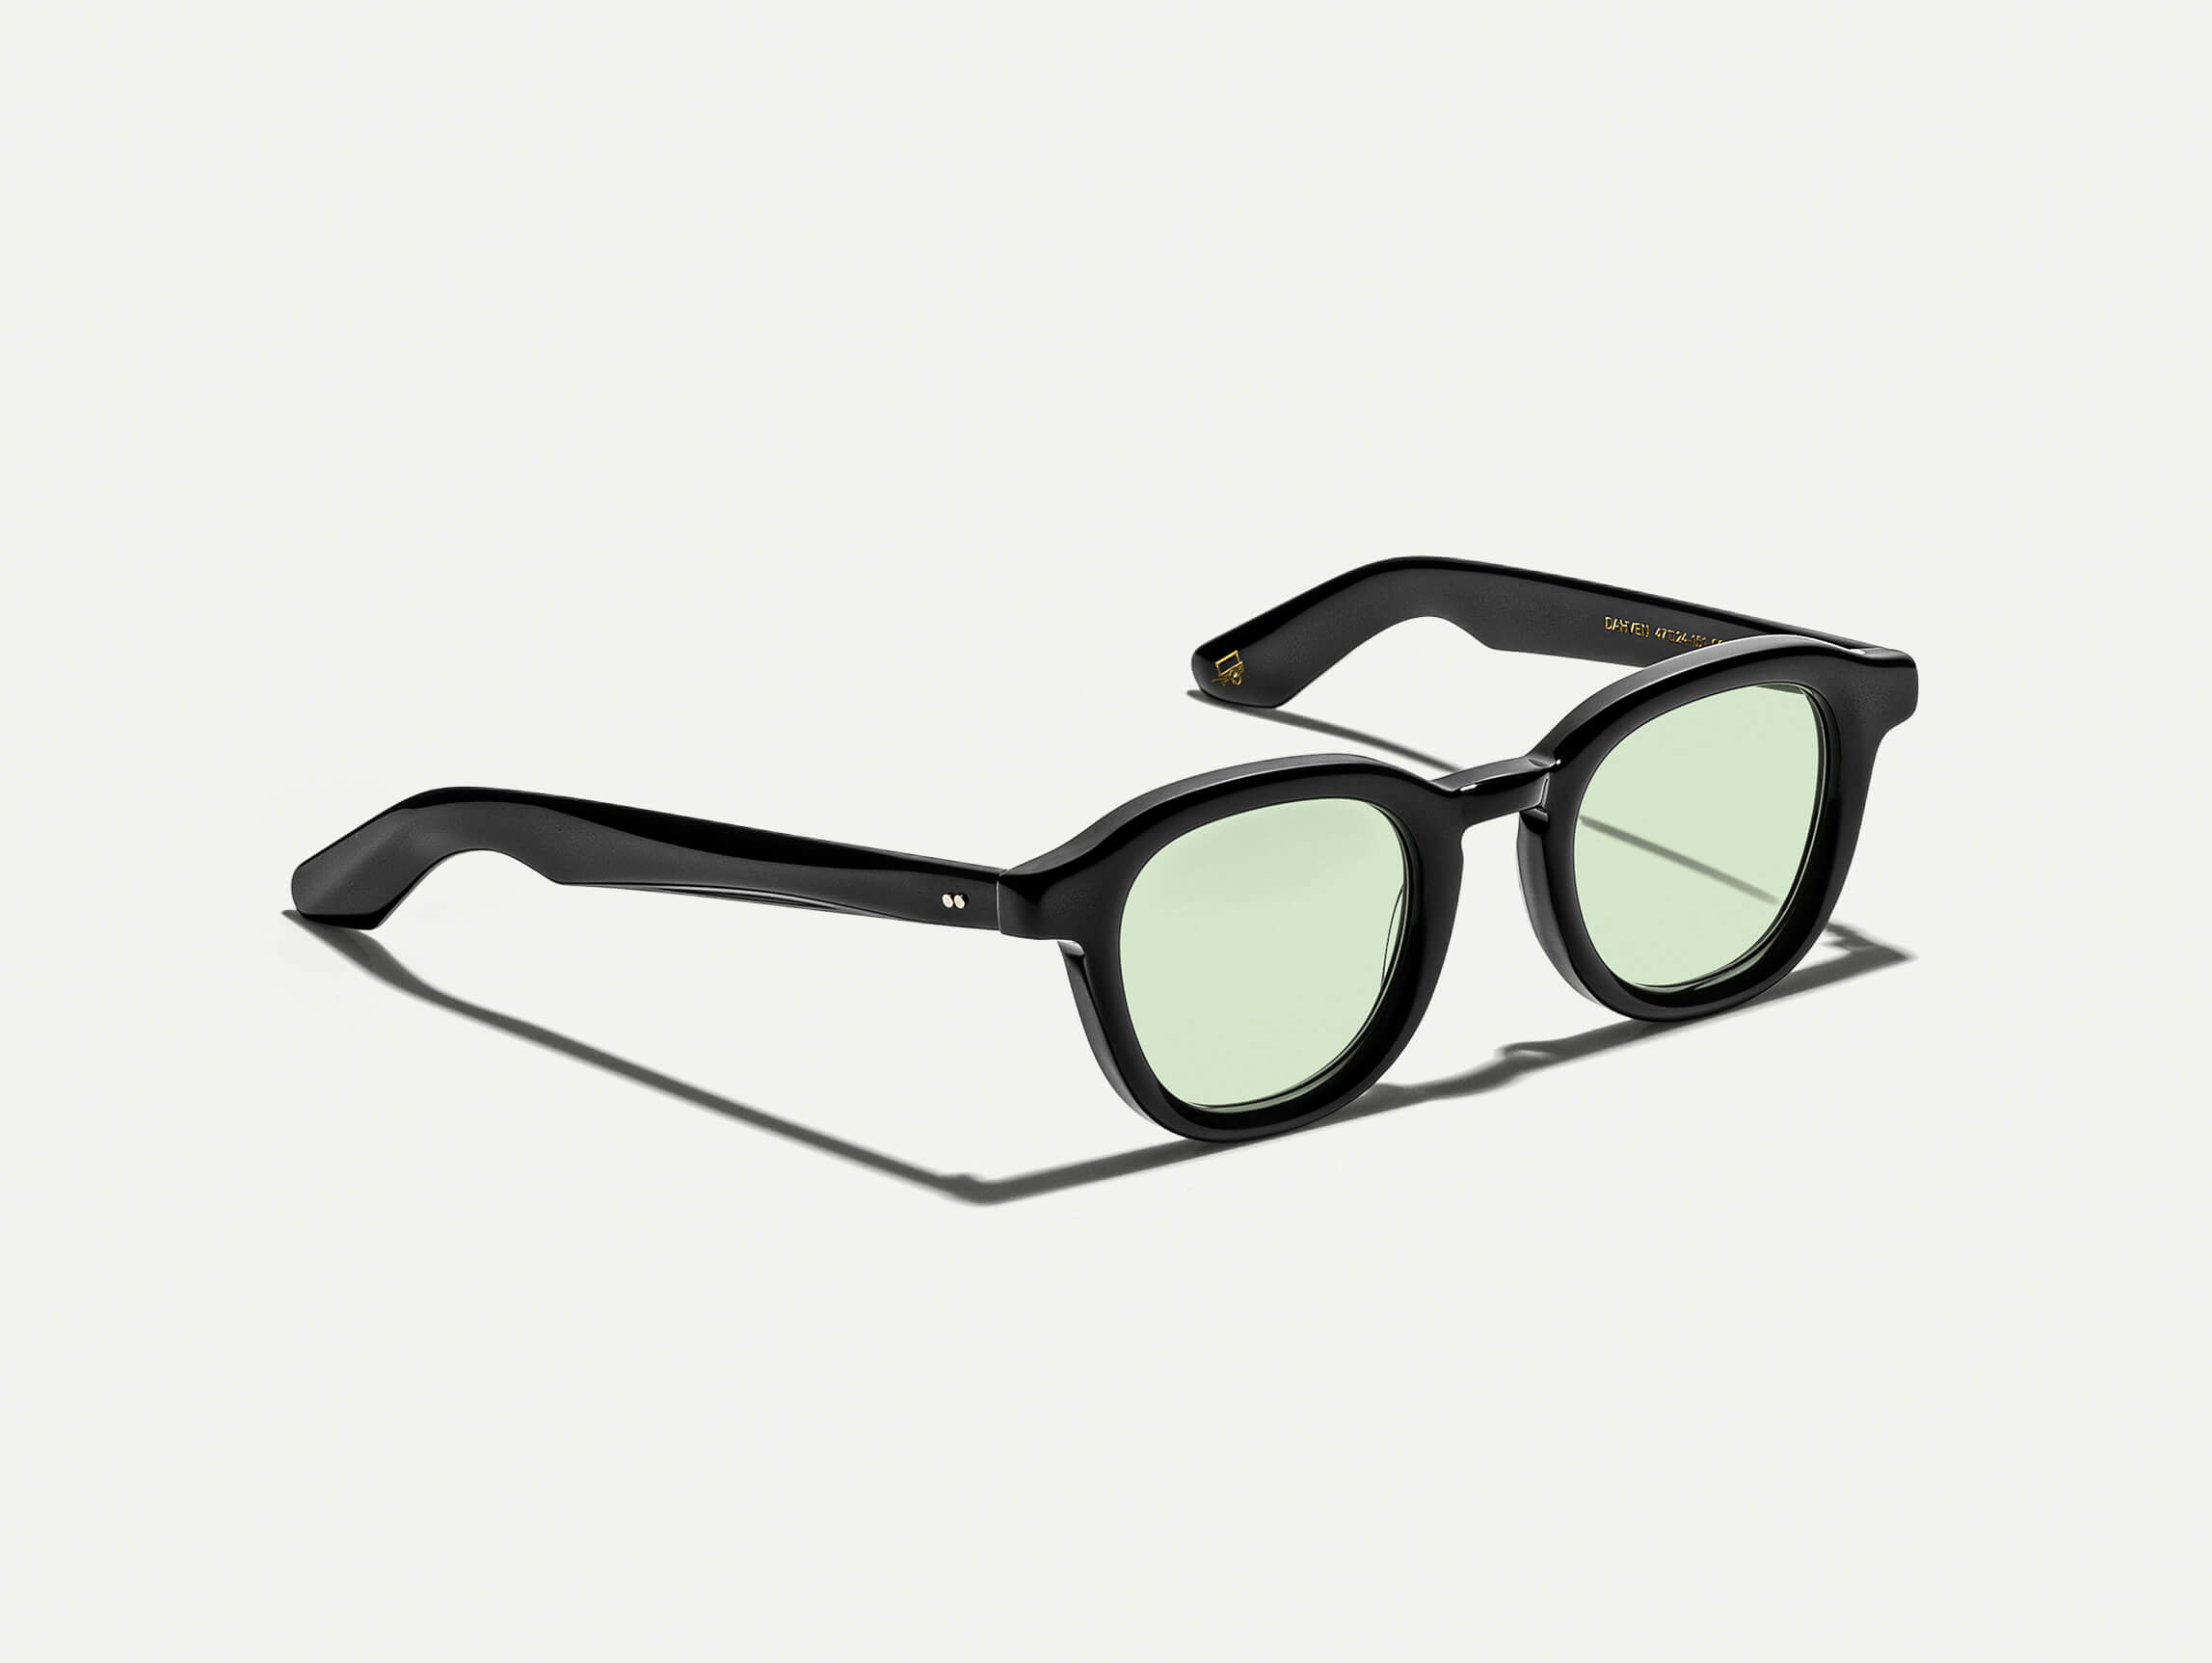 The DAHVEN Black with Limelight Tinted Lenses